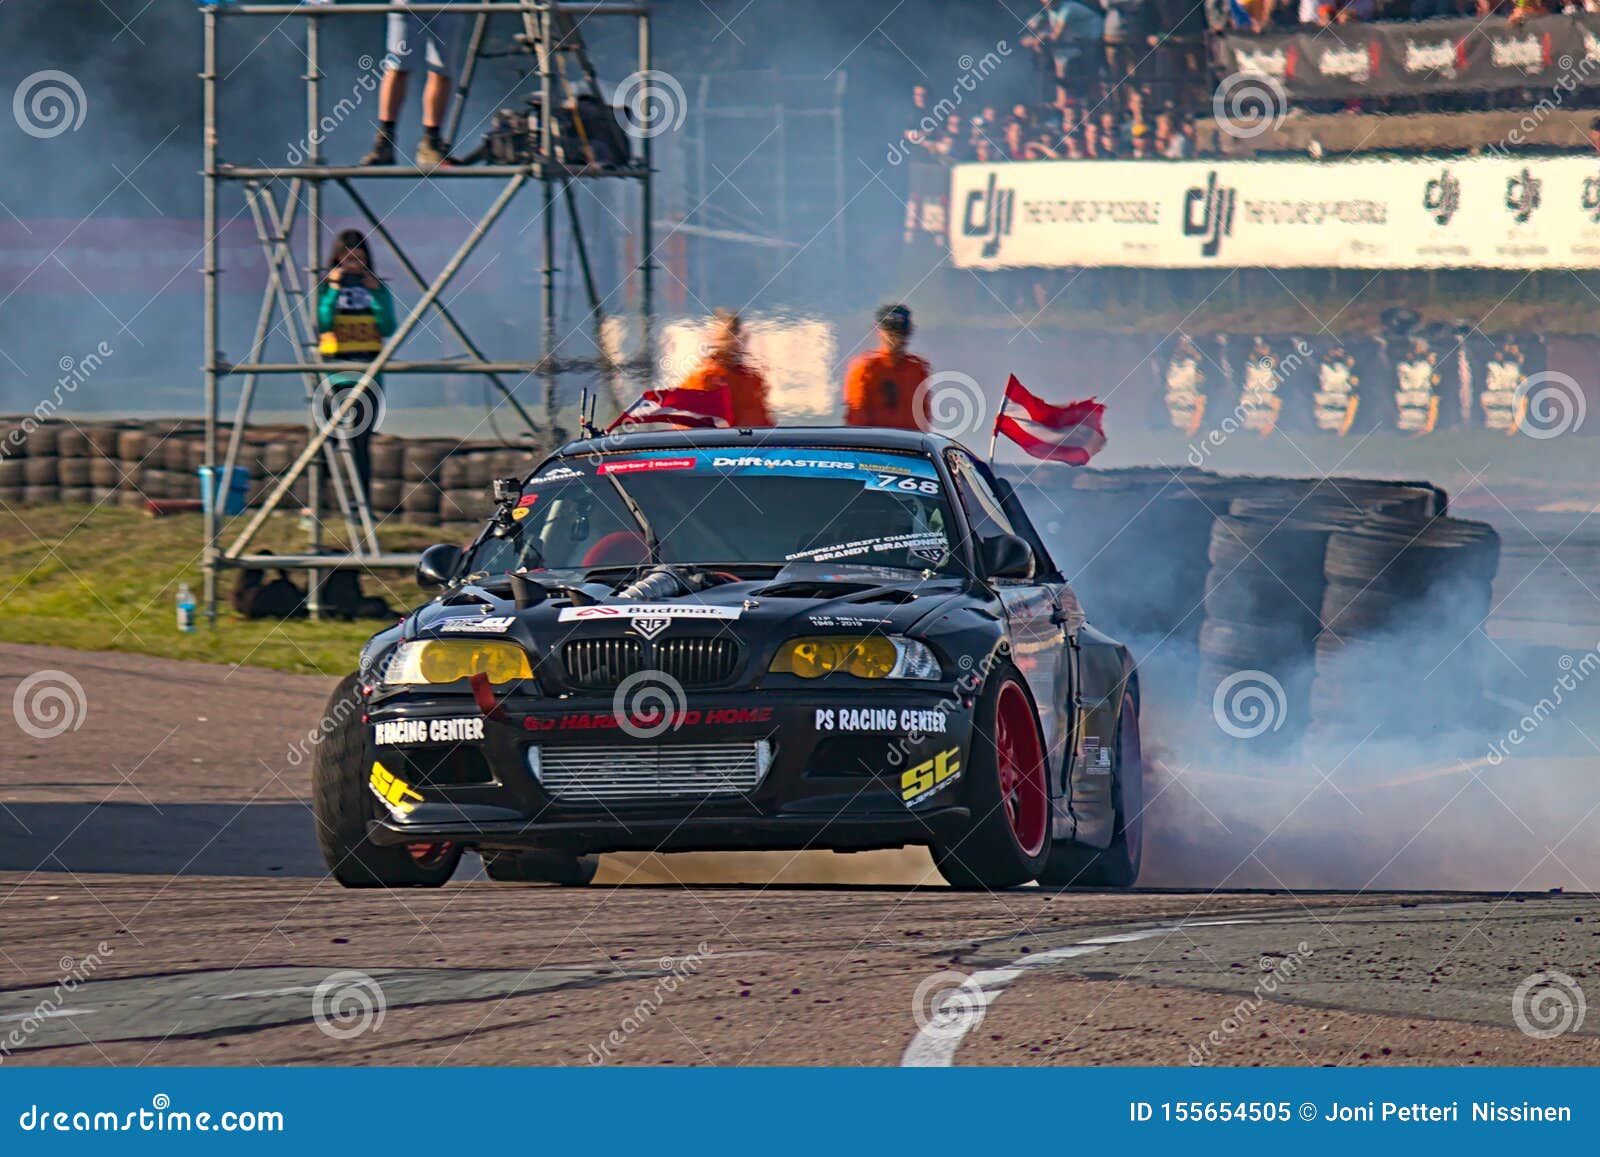 Riga, Latvia - August 02, 2019 - Daniel Branciner Latvian Driver Drifting  Editorial Image - Image of competition, august: 155654505